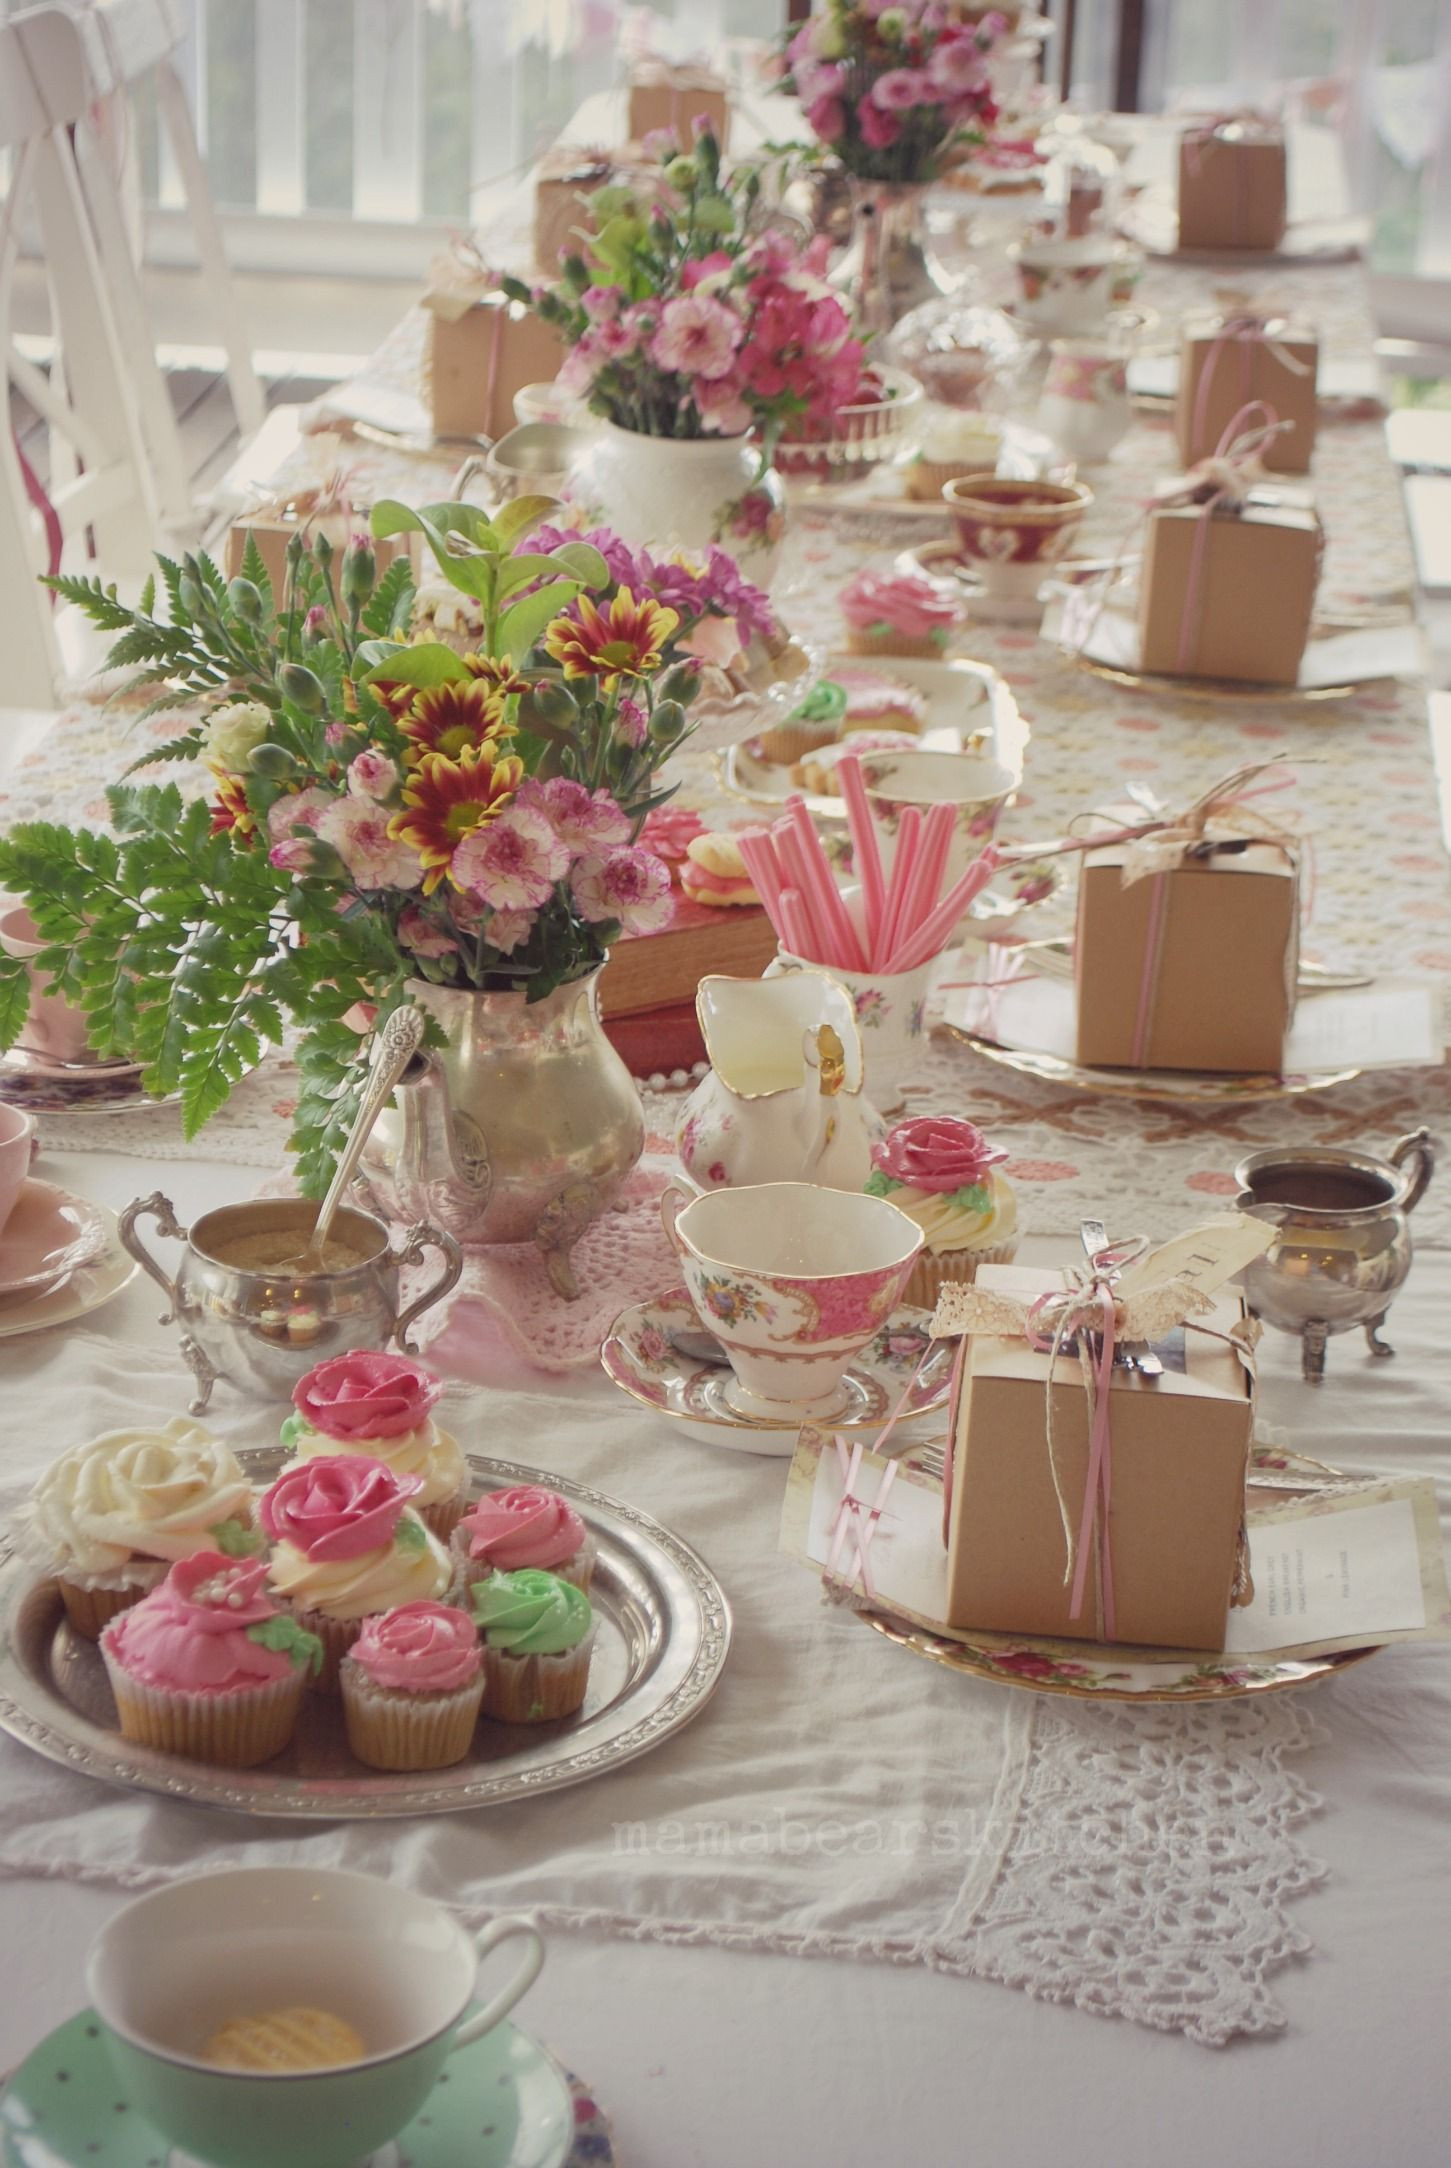 English Tea Party Ideas
 This is the afternoon high tea that we have arranged for